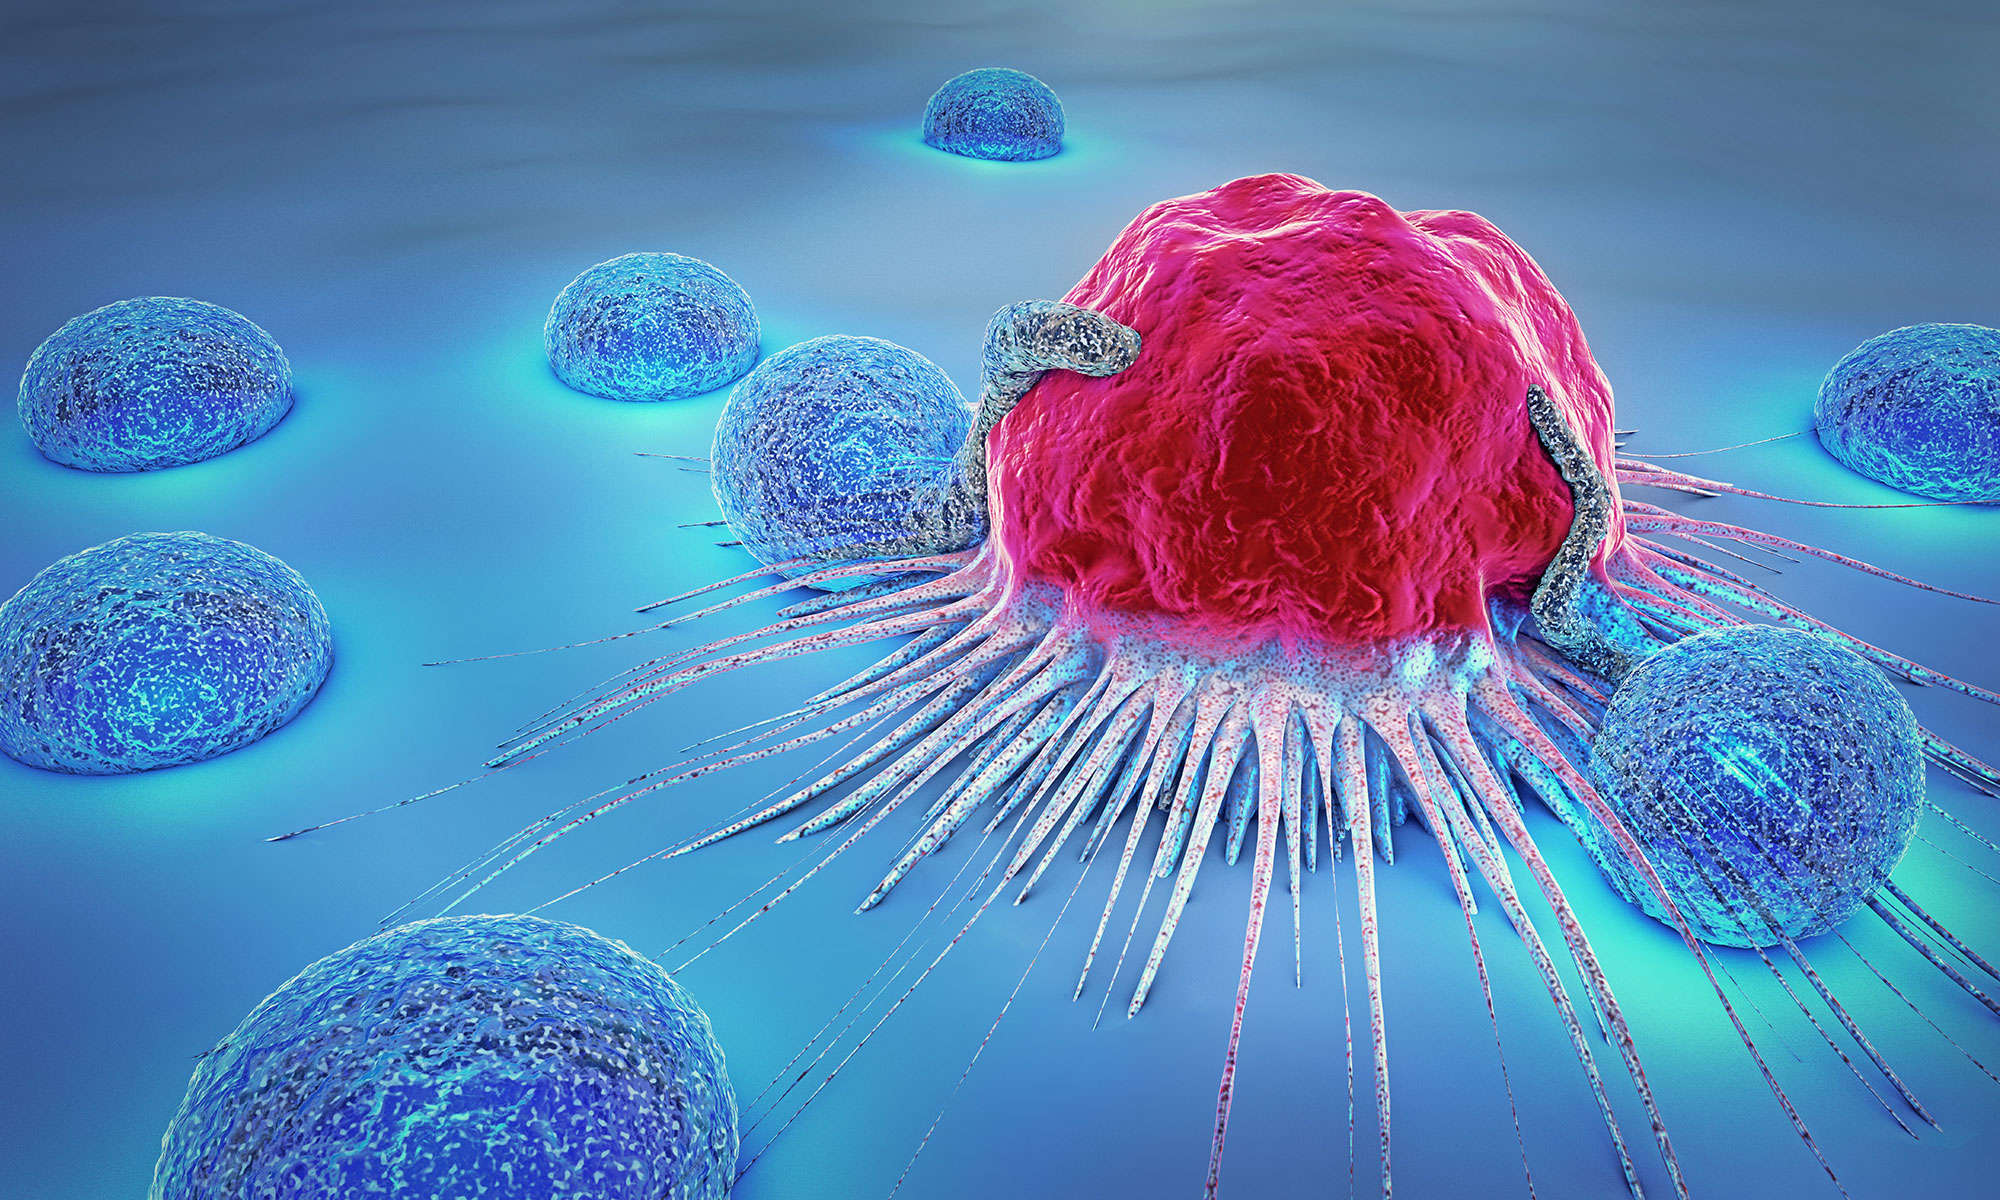 3D artist's rendering of tumor shown in red on ice-blue background. 